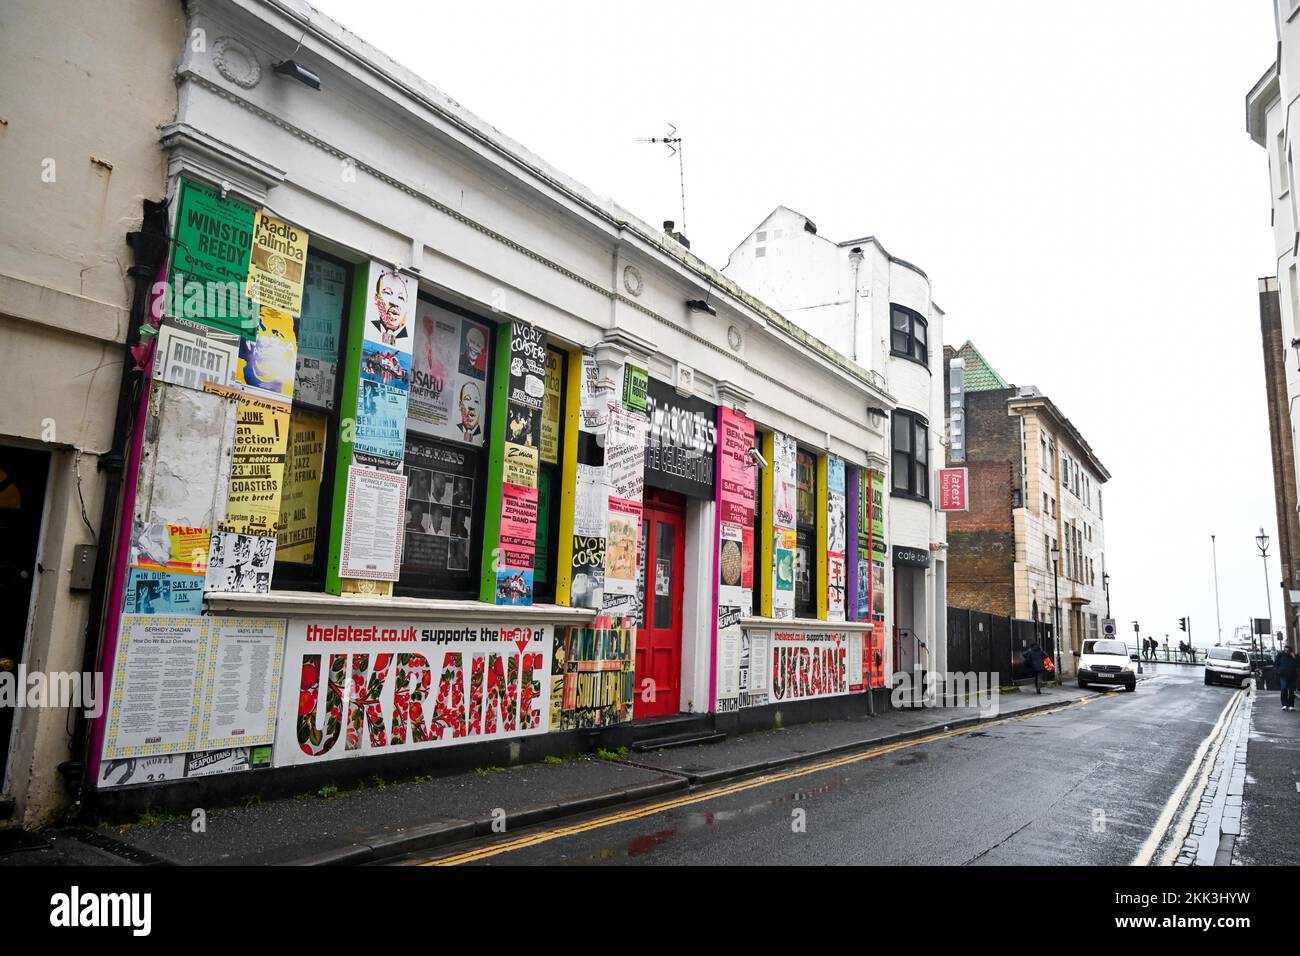 The Latest Bar in Manchester Street Brighton  showing support for Ukraine, Sussex , England UK  Photograph taken by Simon Dack Stock Photo